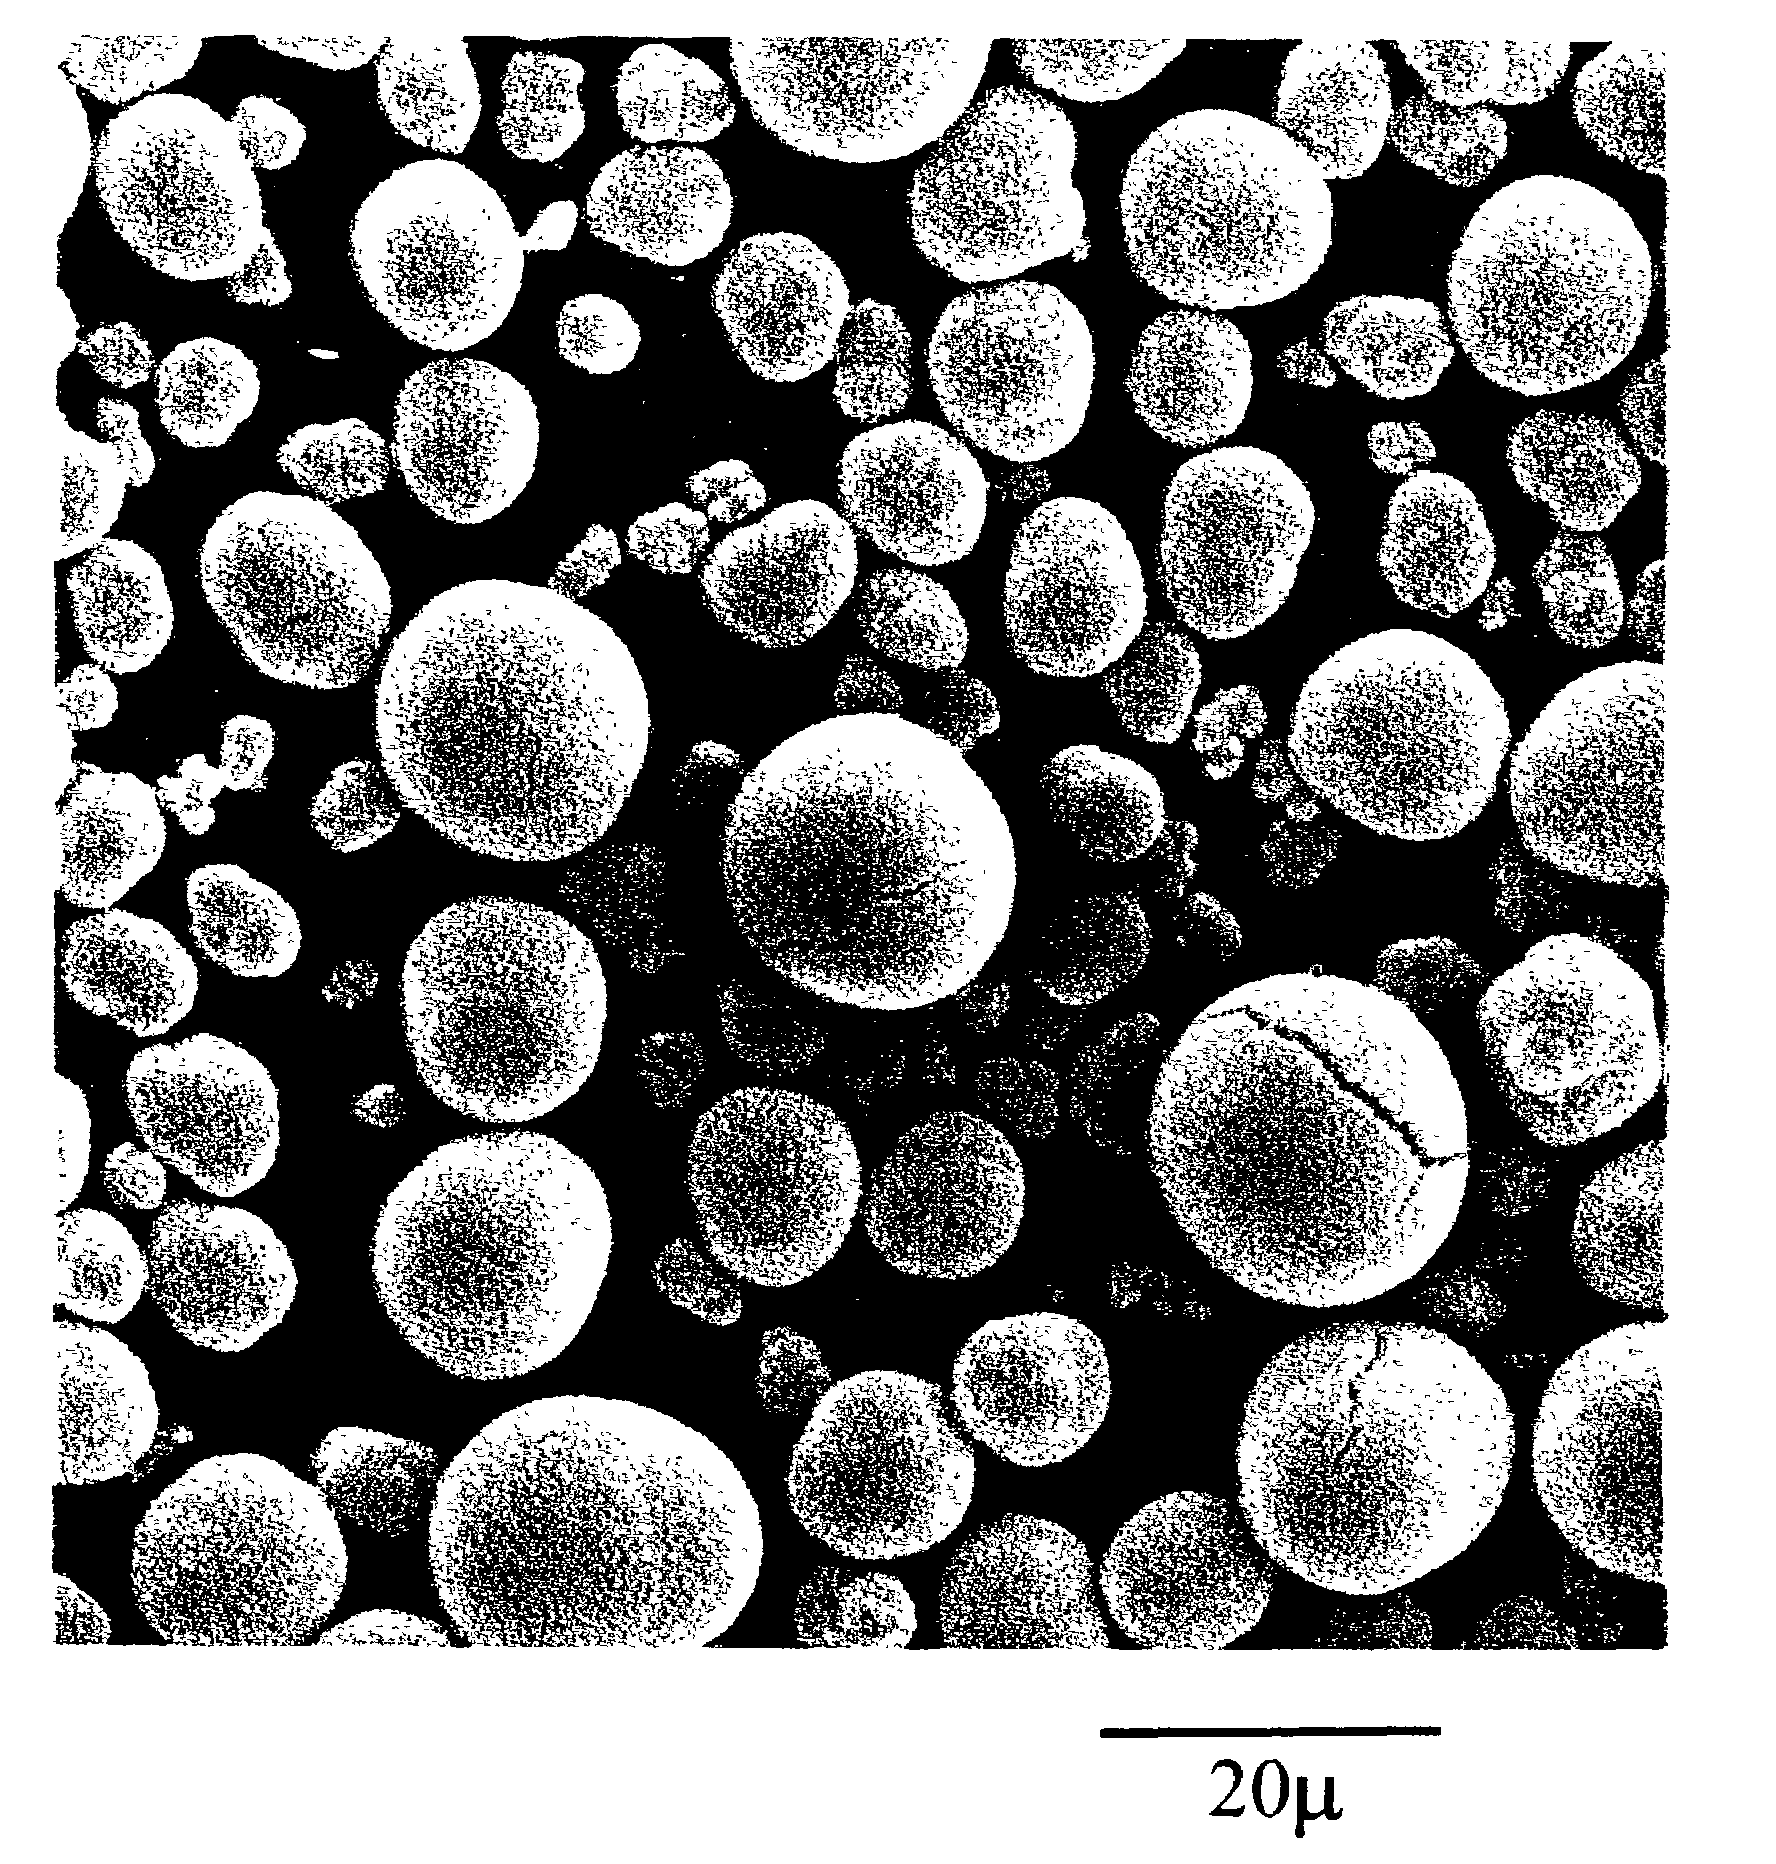 Nickel Hydroxide electrode material with improved microstructure and method for making the same